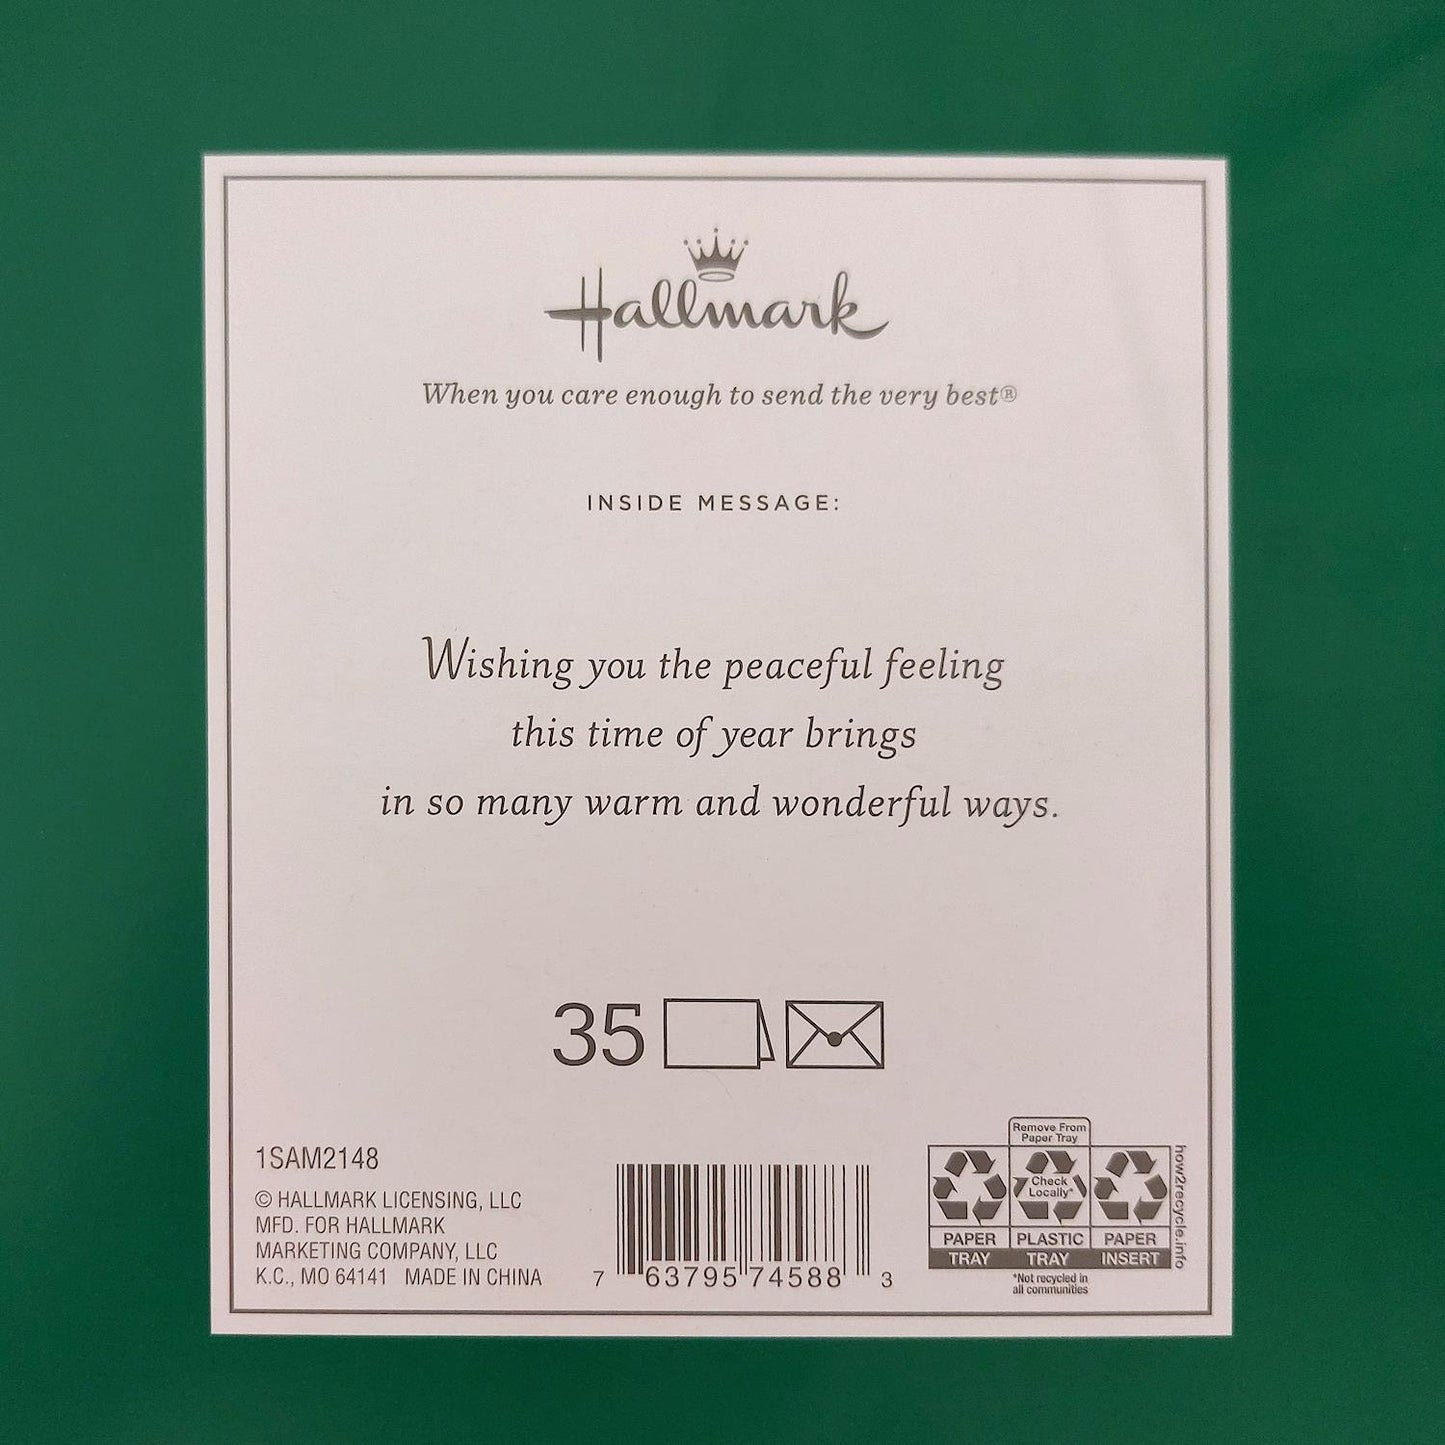 Hallmark Boxed Deluxe Christmas Cards Gold Medallion 35 Cards, Designed Self-Sealing Envelopes and Seals